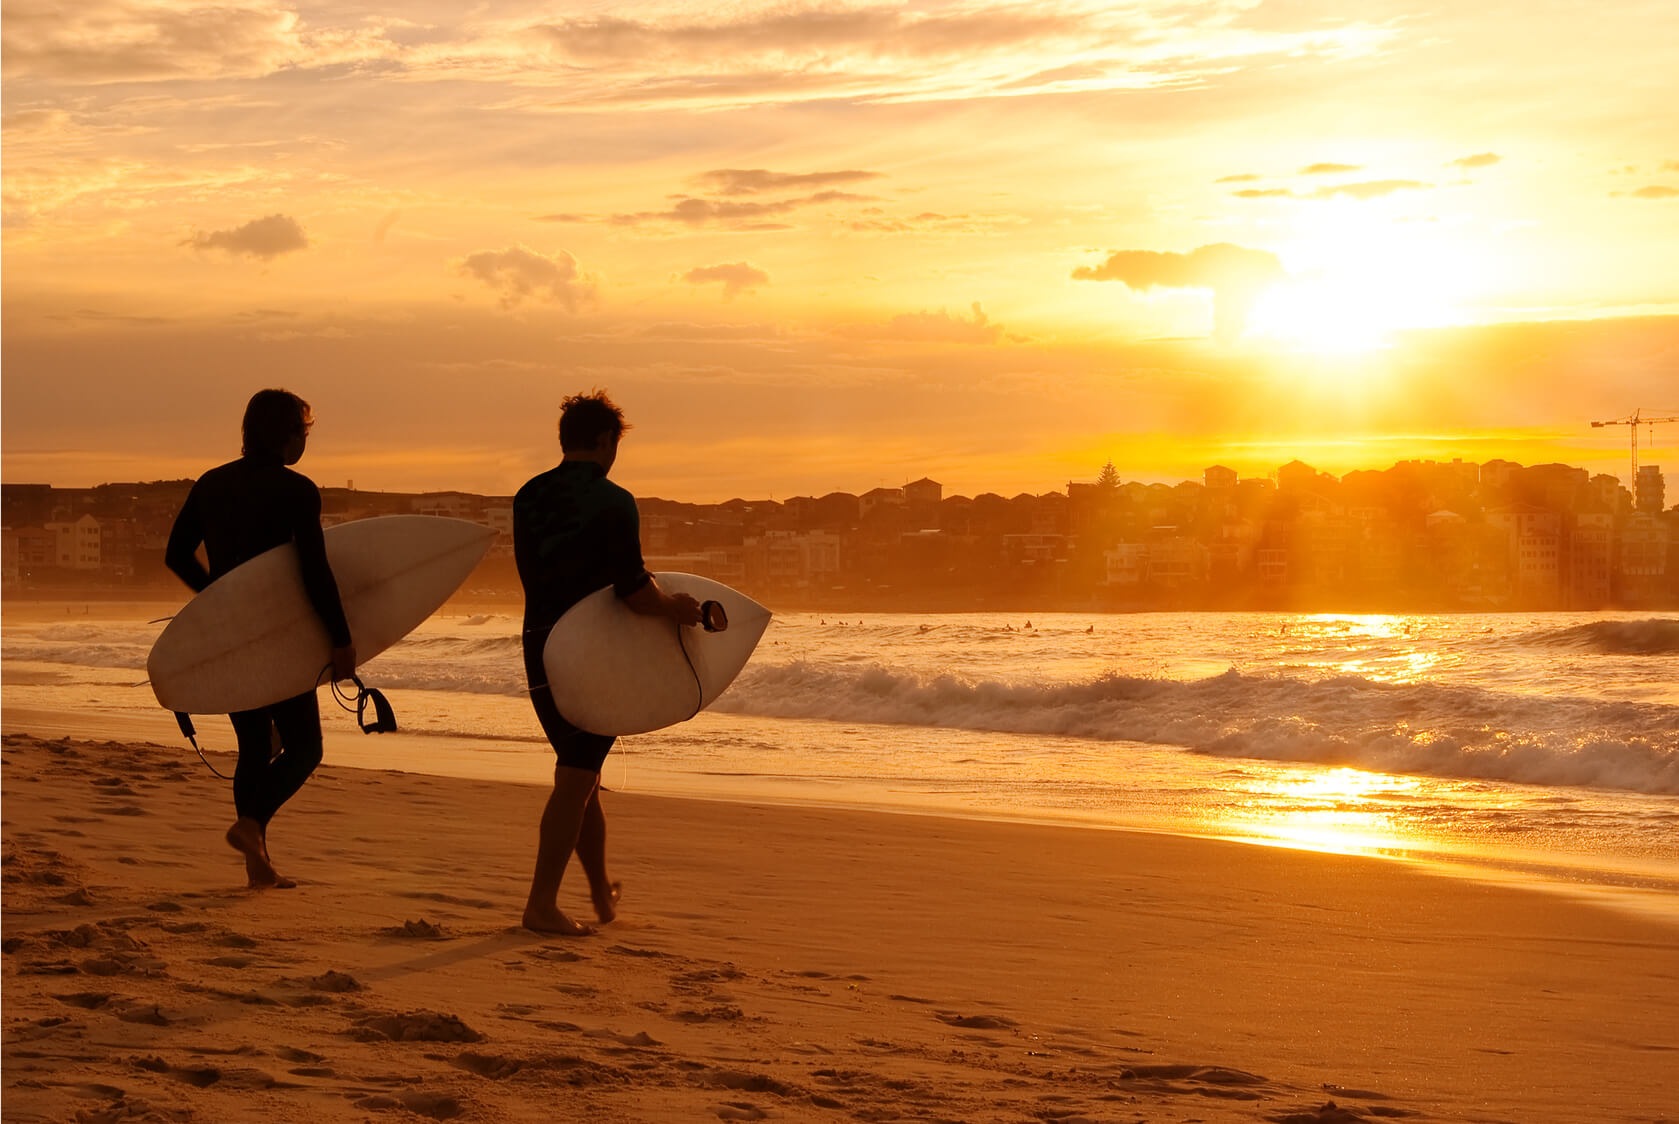 Two Seabourn surfers walk toward the water in the sunset.